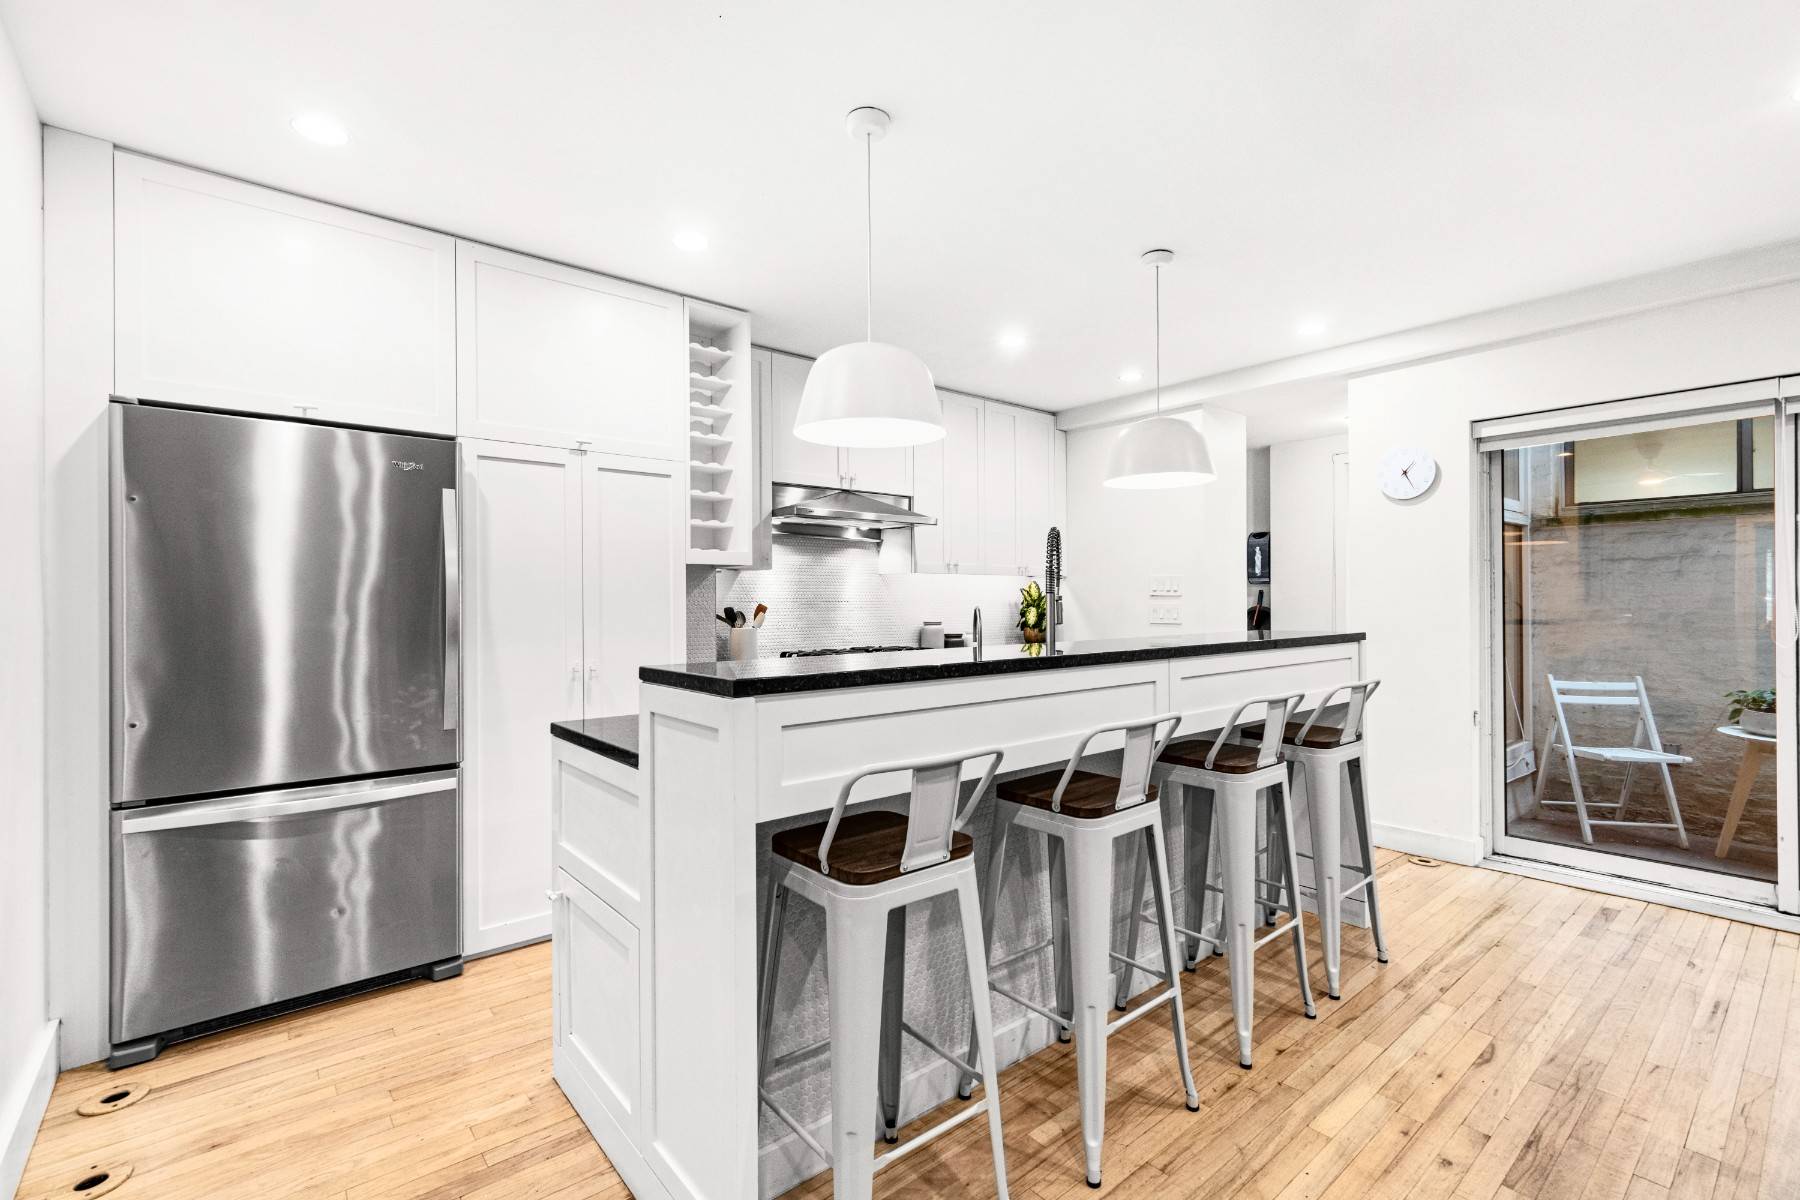 Welcome to 849 Carroll Street, a charming pre war building located in the heart of Park Slope.